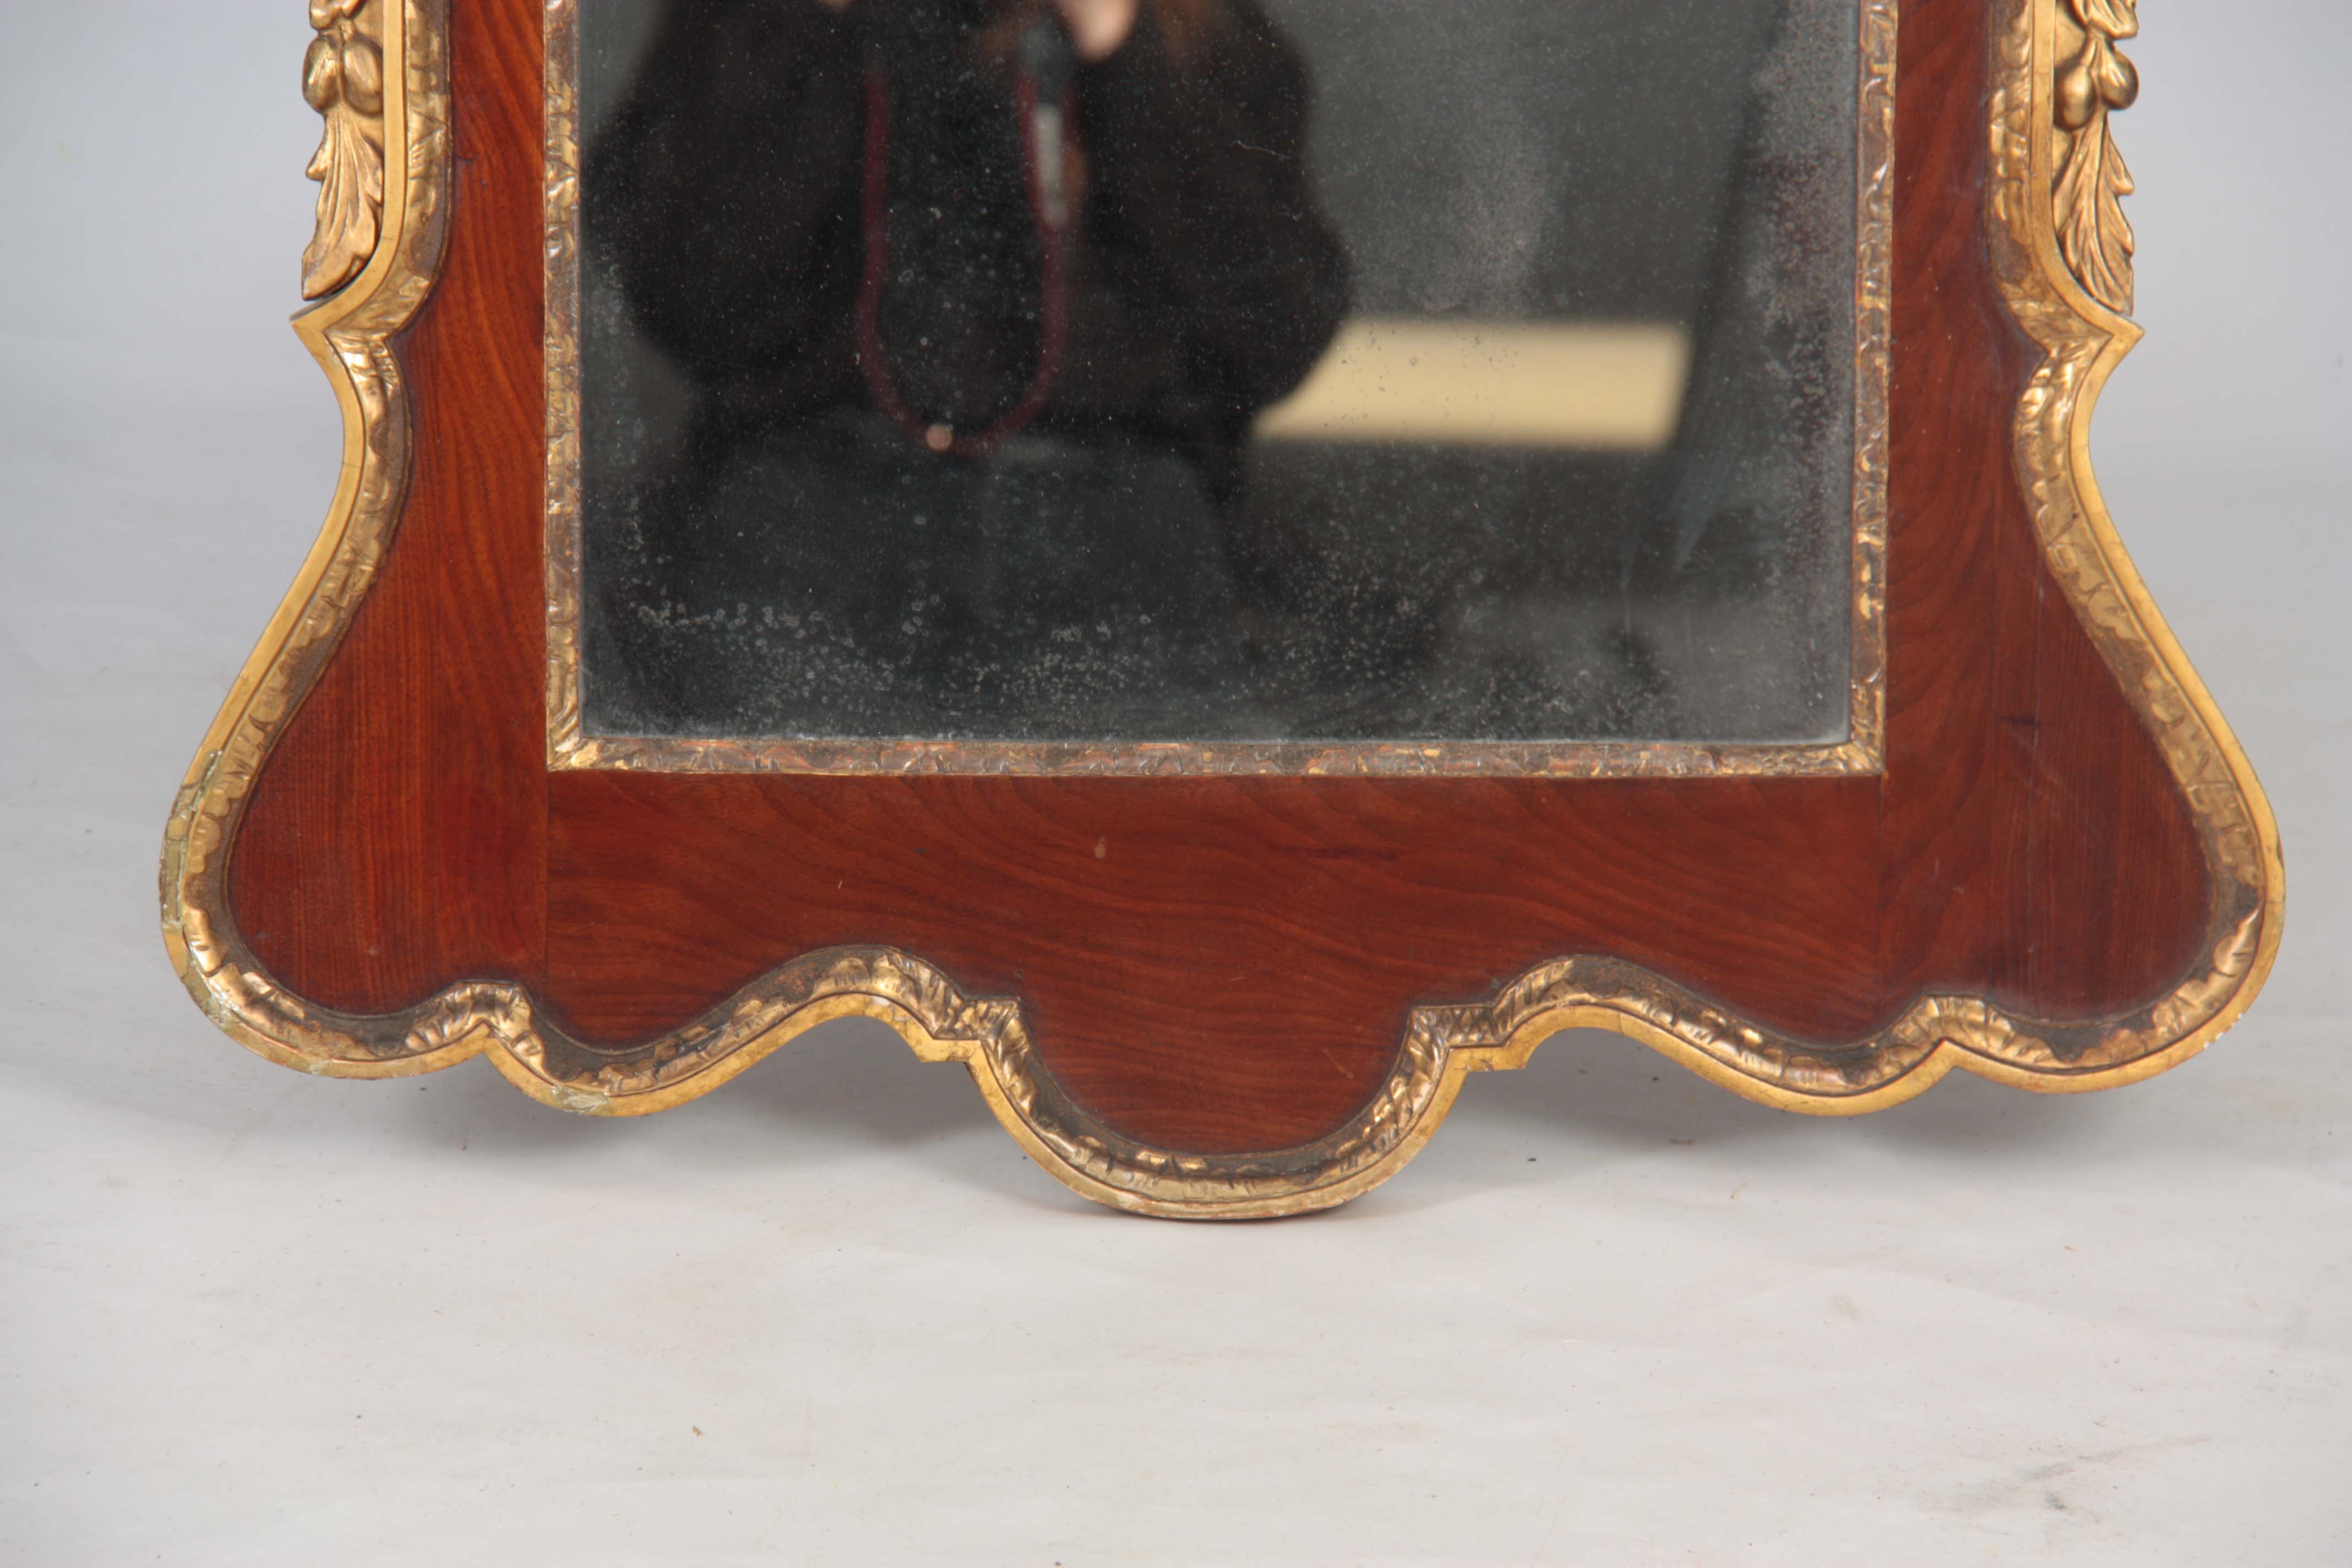 AN 18TH CENTURY MAHOGANY AND PARCEL GILT HANGING MIRROR with elaborate swan neck and shellwork - Image 4 of 5